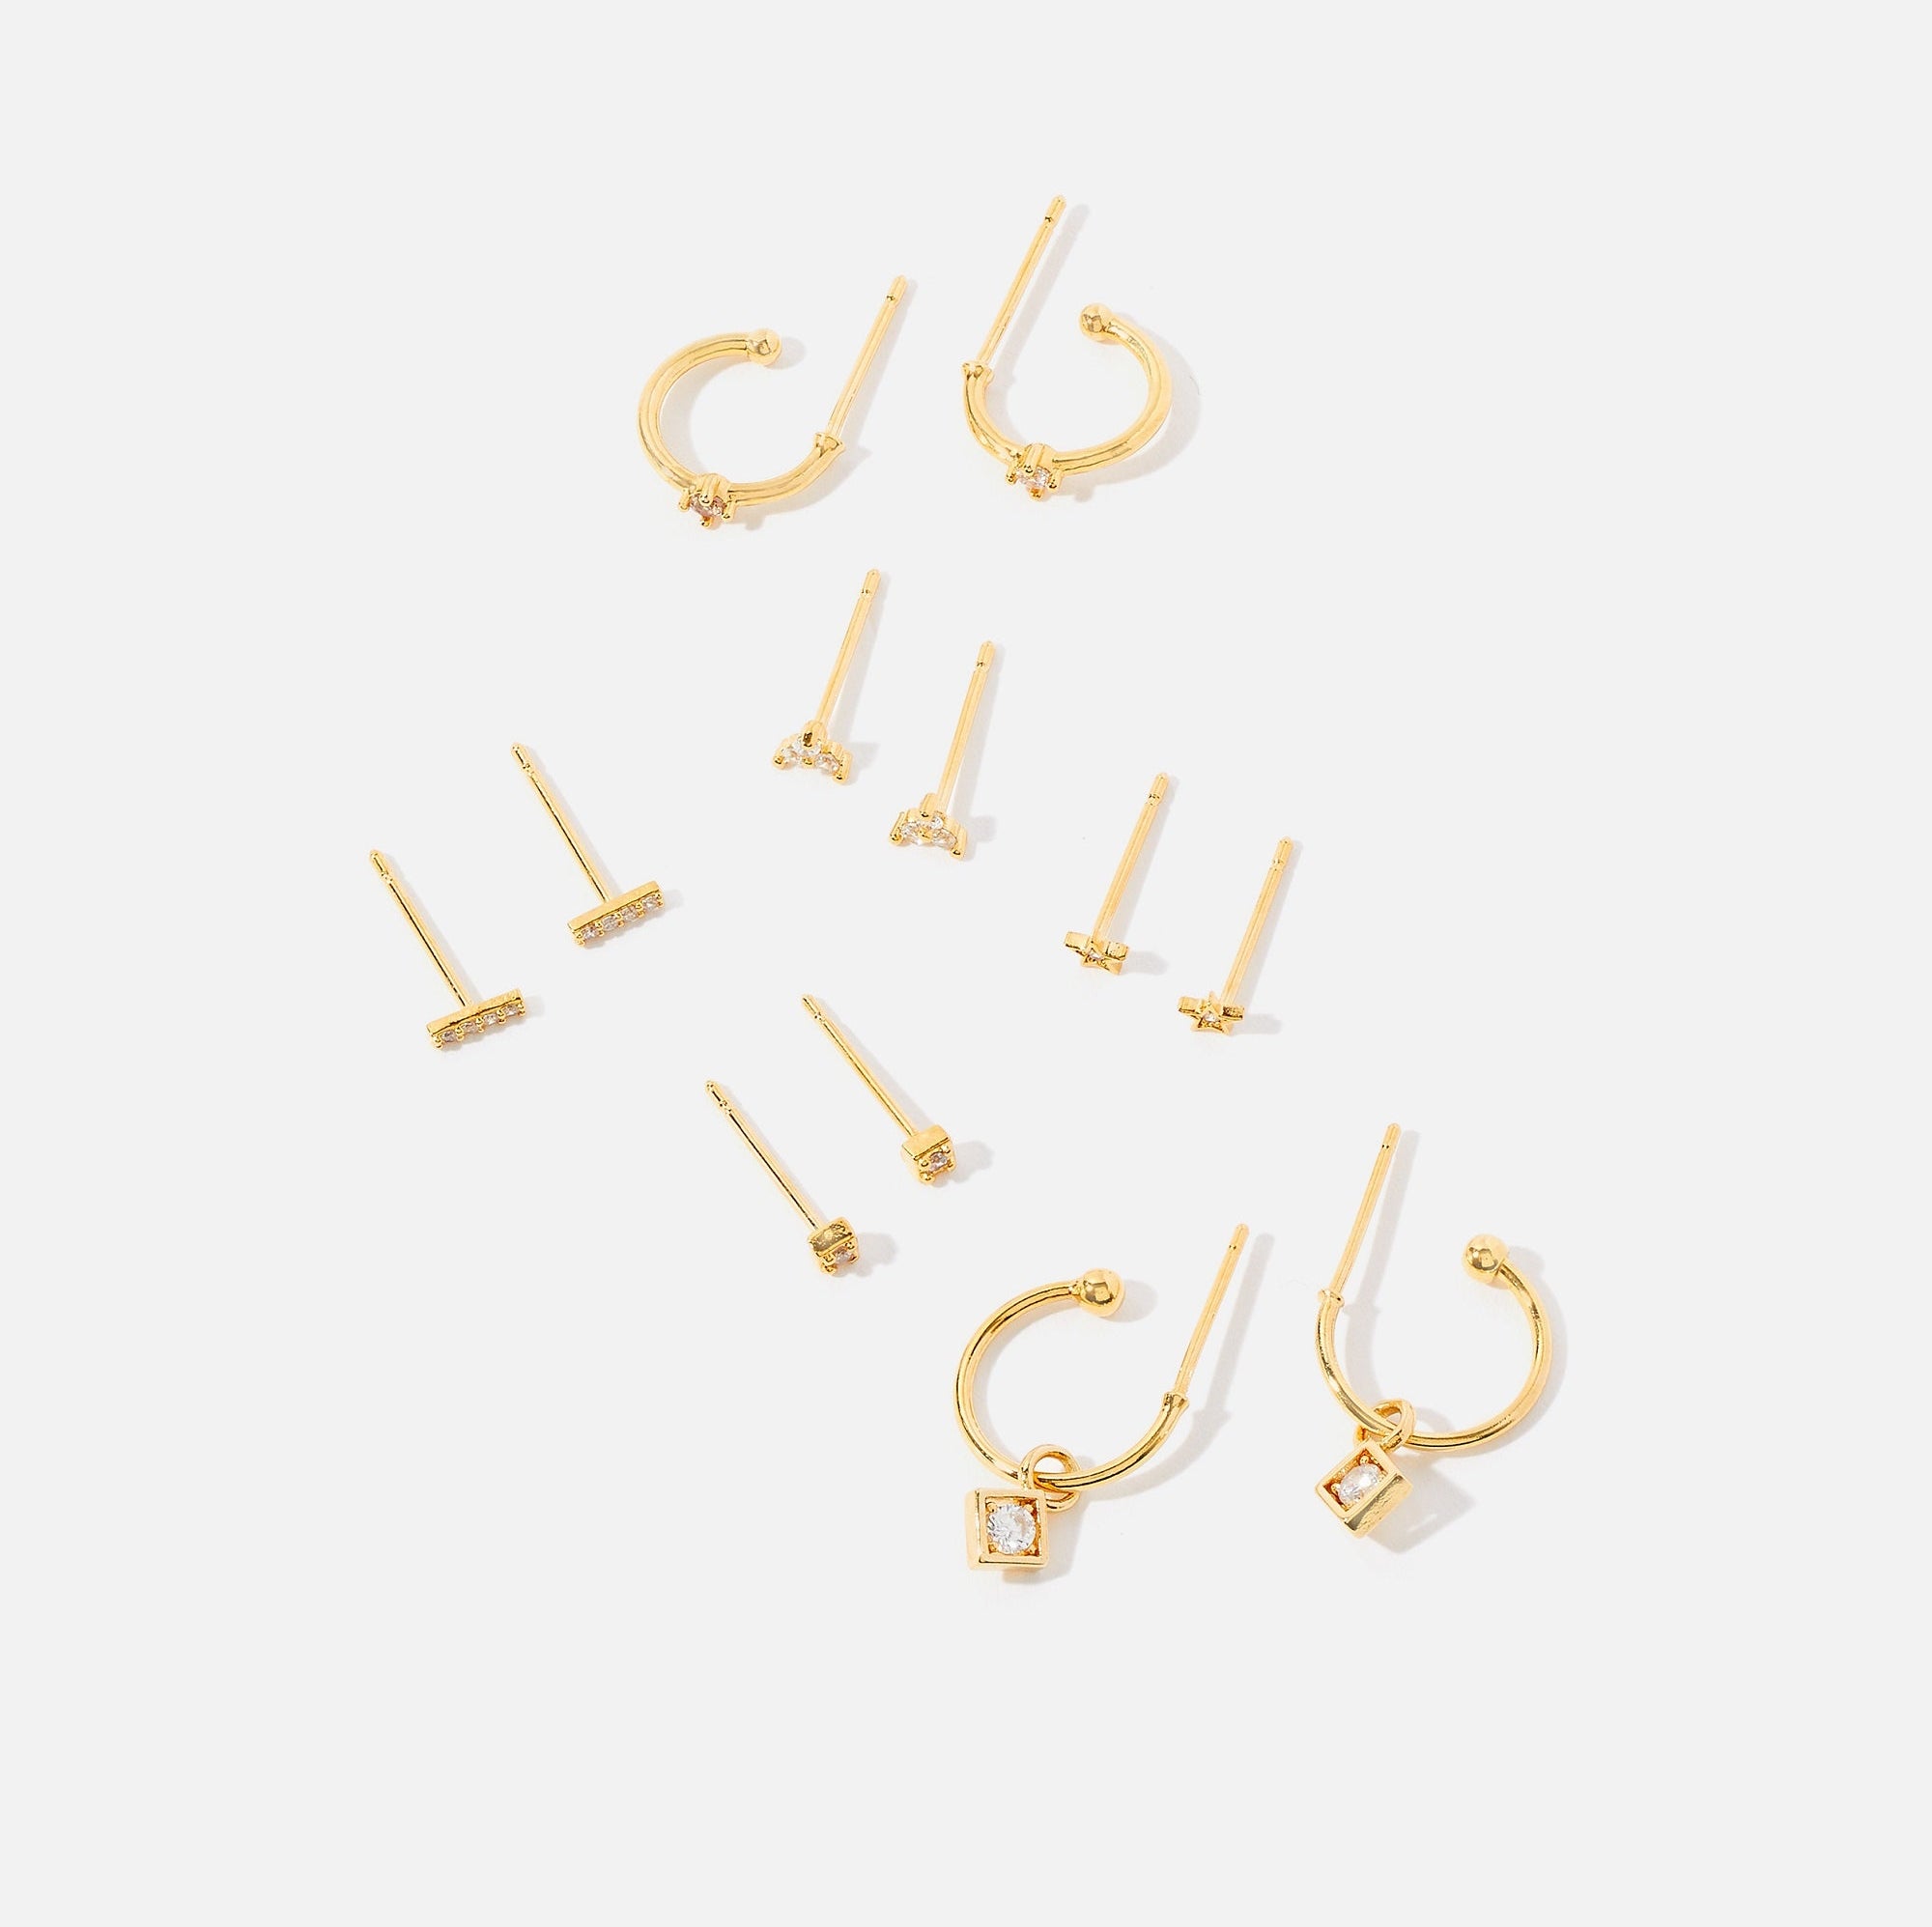 Real Gold Plated Set Of 12 Pave Hoop & Stud Earring Pack For Women By Accessorize London